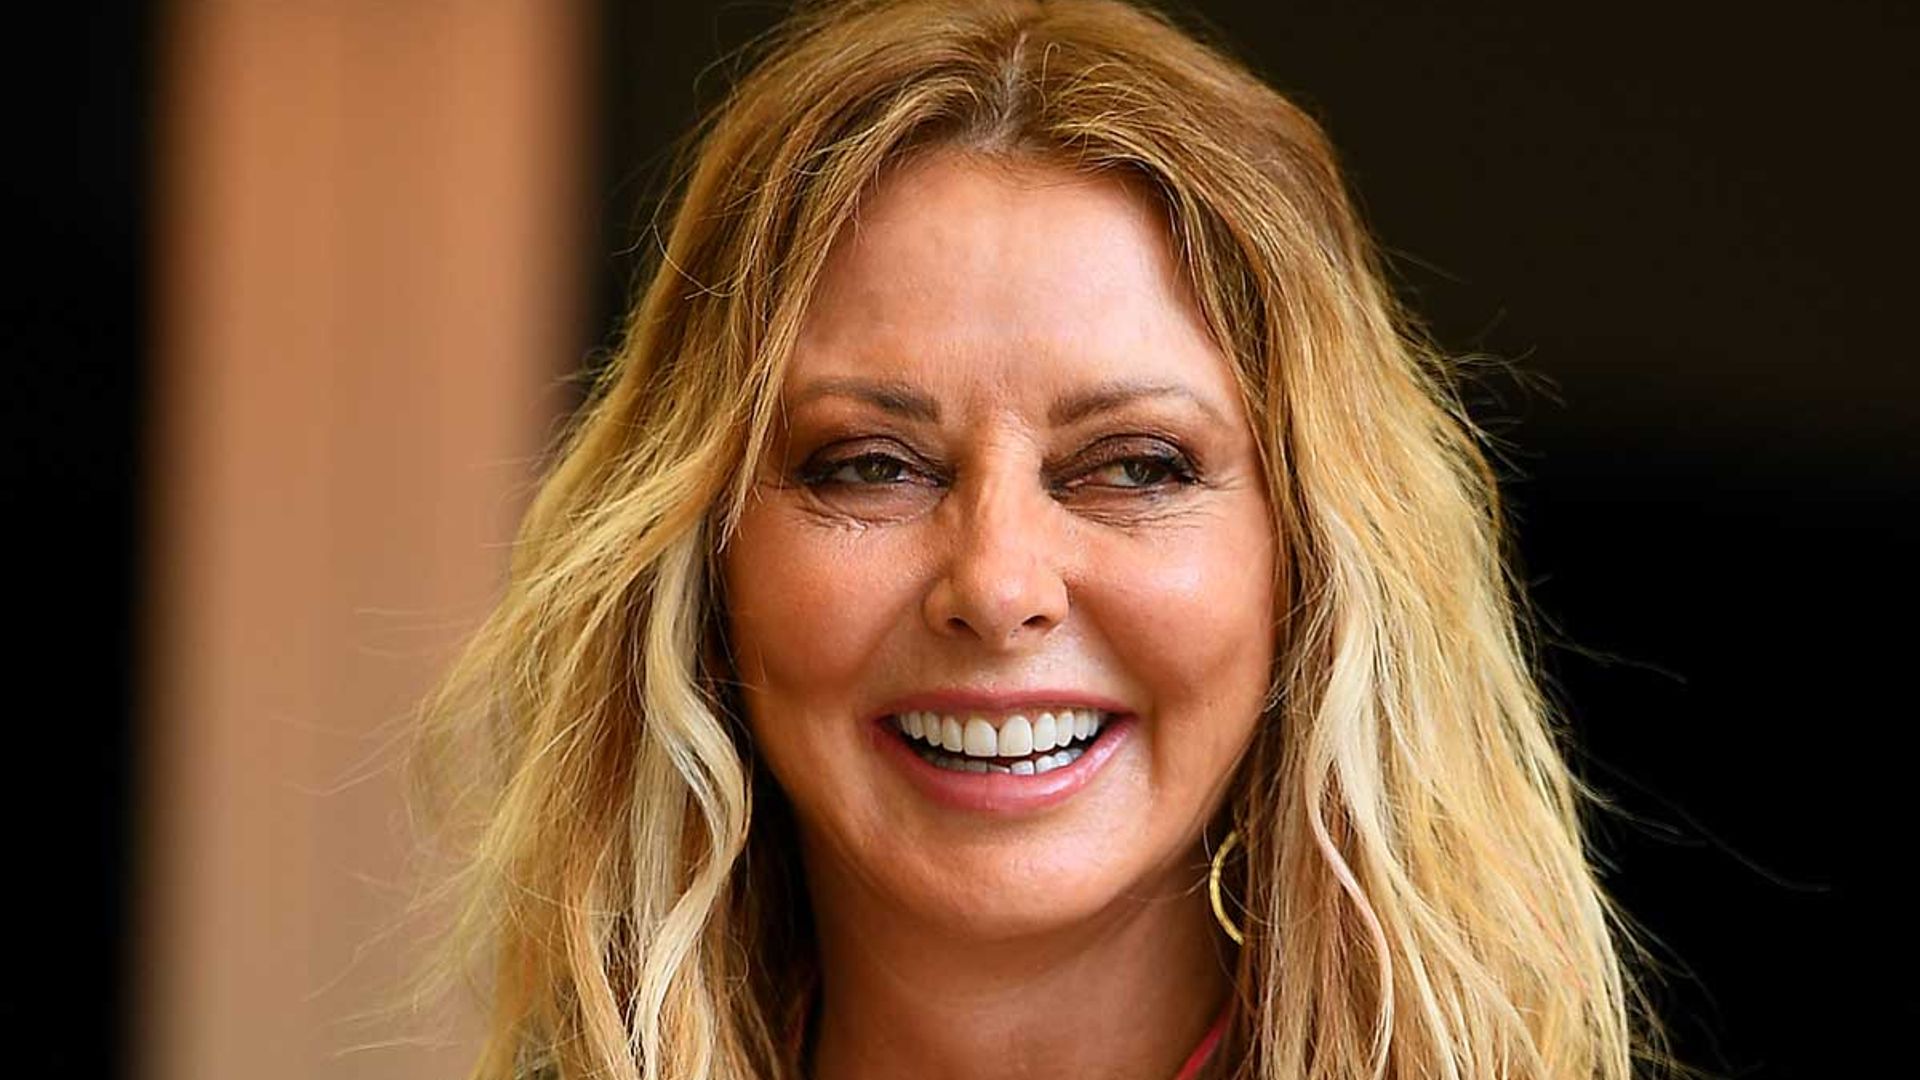 Carol Vorderman, 60, showcases her curves in skin-tight workout